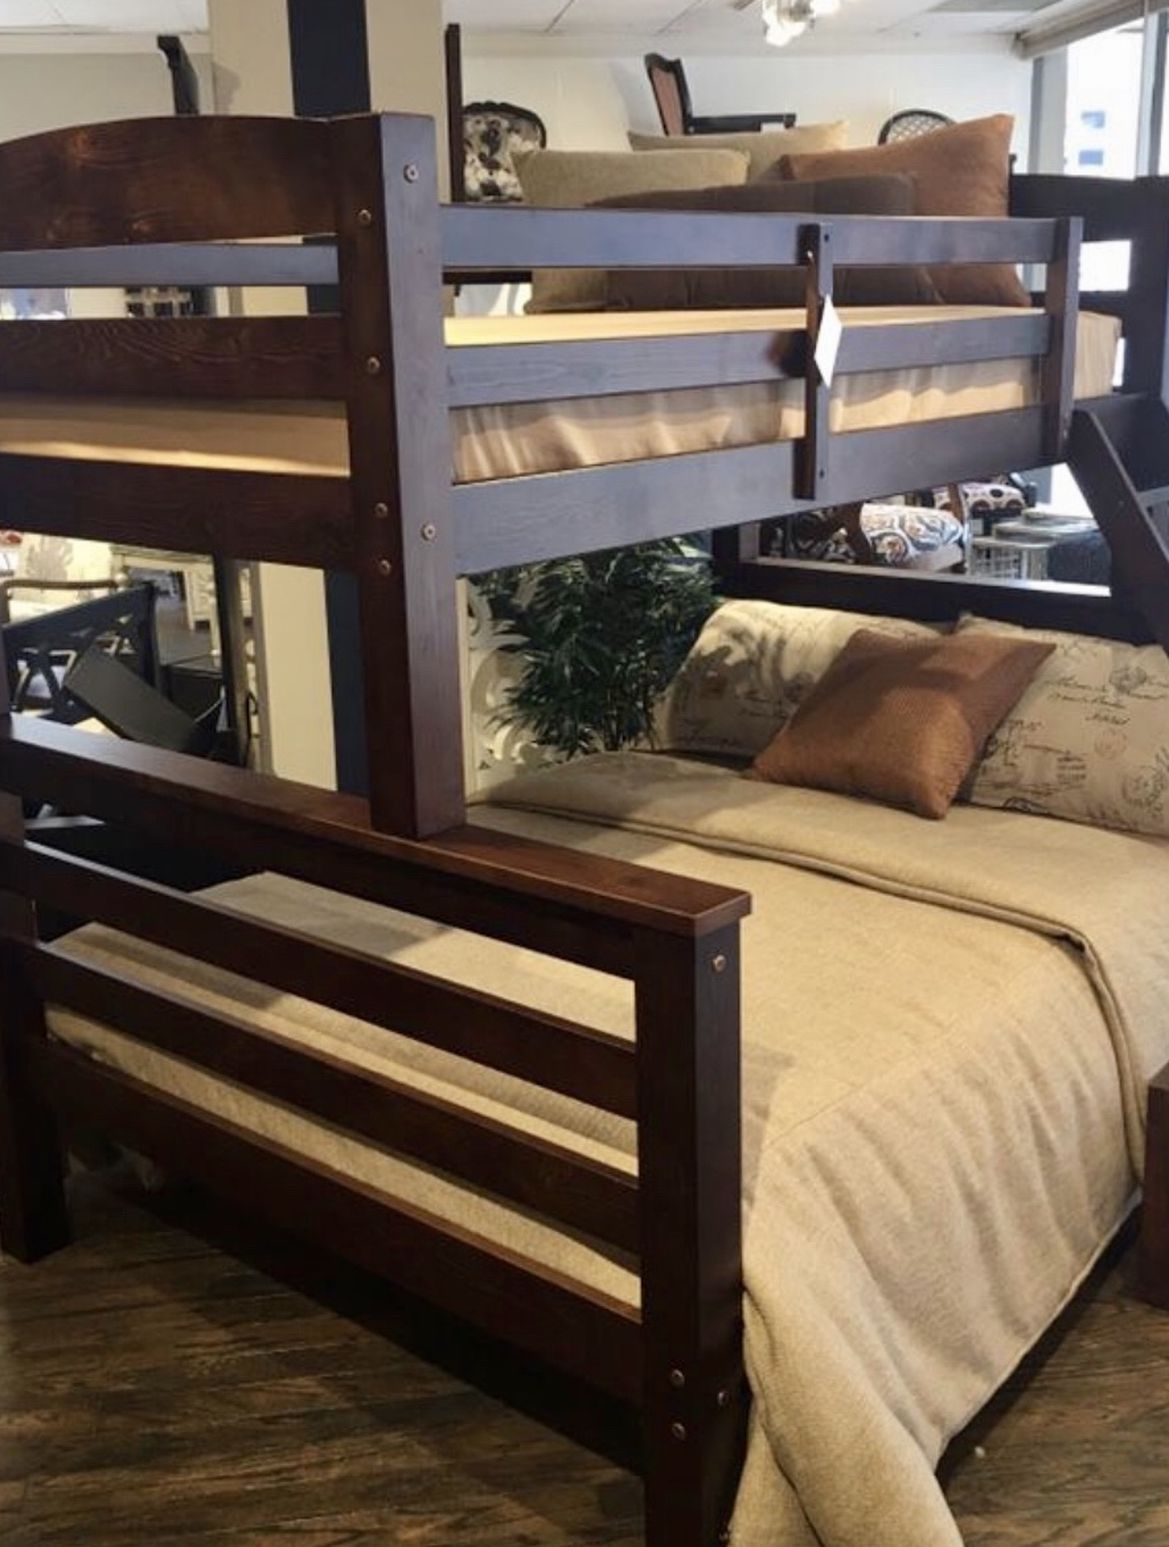 💥Huge Blowout Furniture Sale!💥 Twin Full Wood Bunk Bed W/ Slats! Brand New In Box! $50 Down Takes It Home Today!